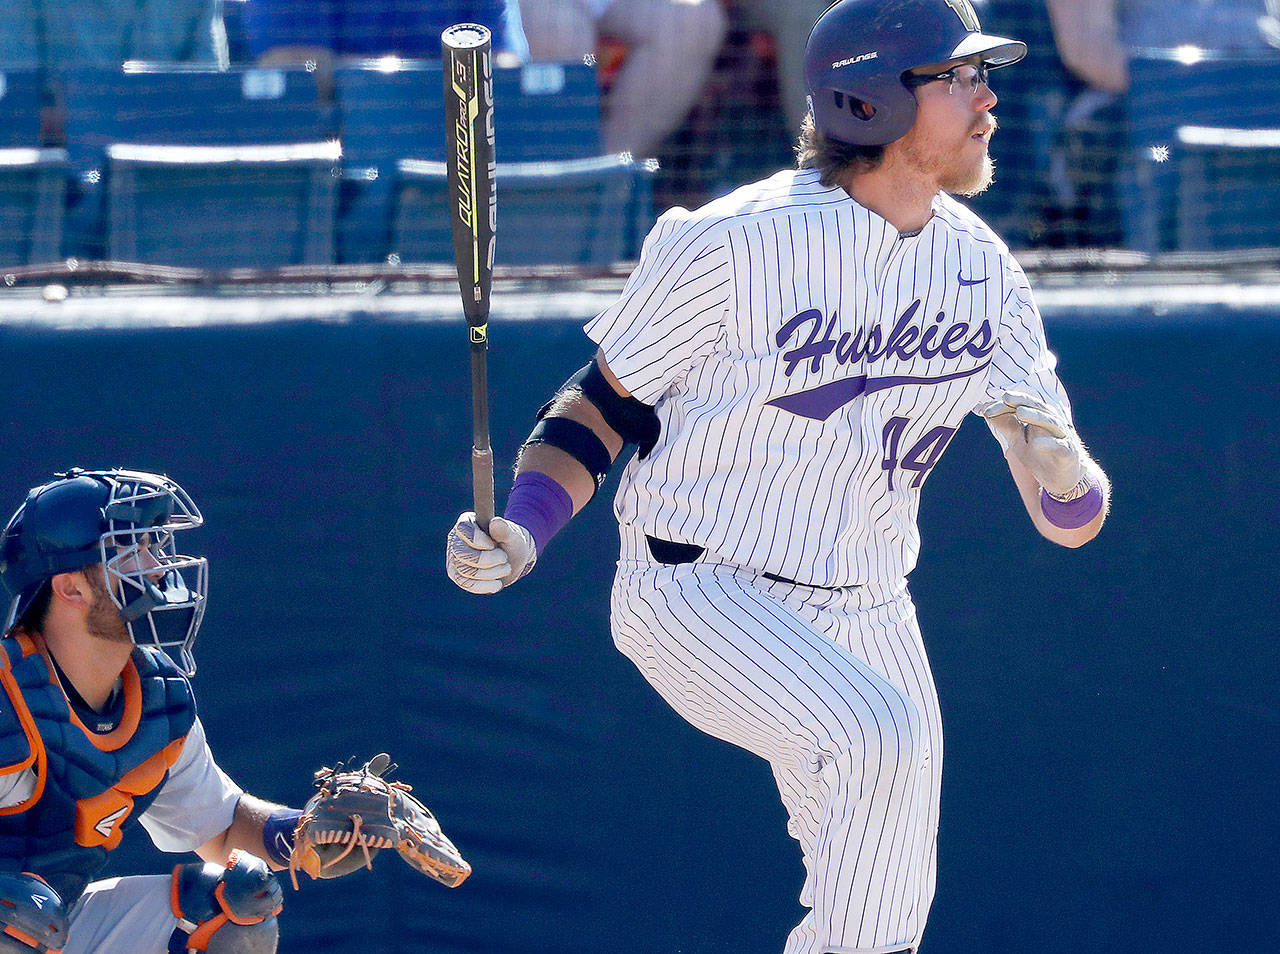 Washington’s Joe Wainhouse hits a solo home run against Cal State Fullerton in the fourth inning on Saturday, June 9, 2018, at Goodwin Field in Fullerton, Calif. The Huskies took two of three games from the Titans to earn their first trip to the College World Series. (Luis Sinco/Los Angeles Times/TNS)